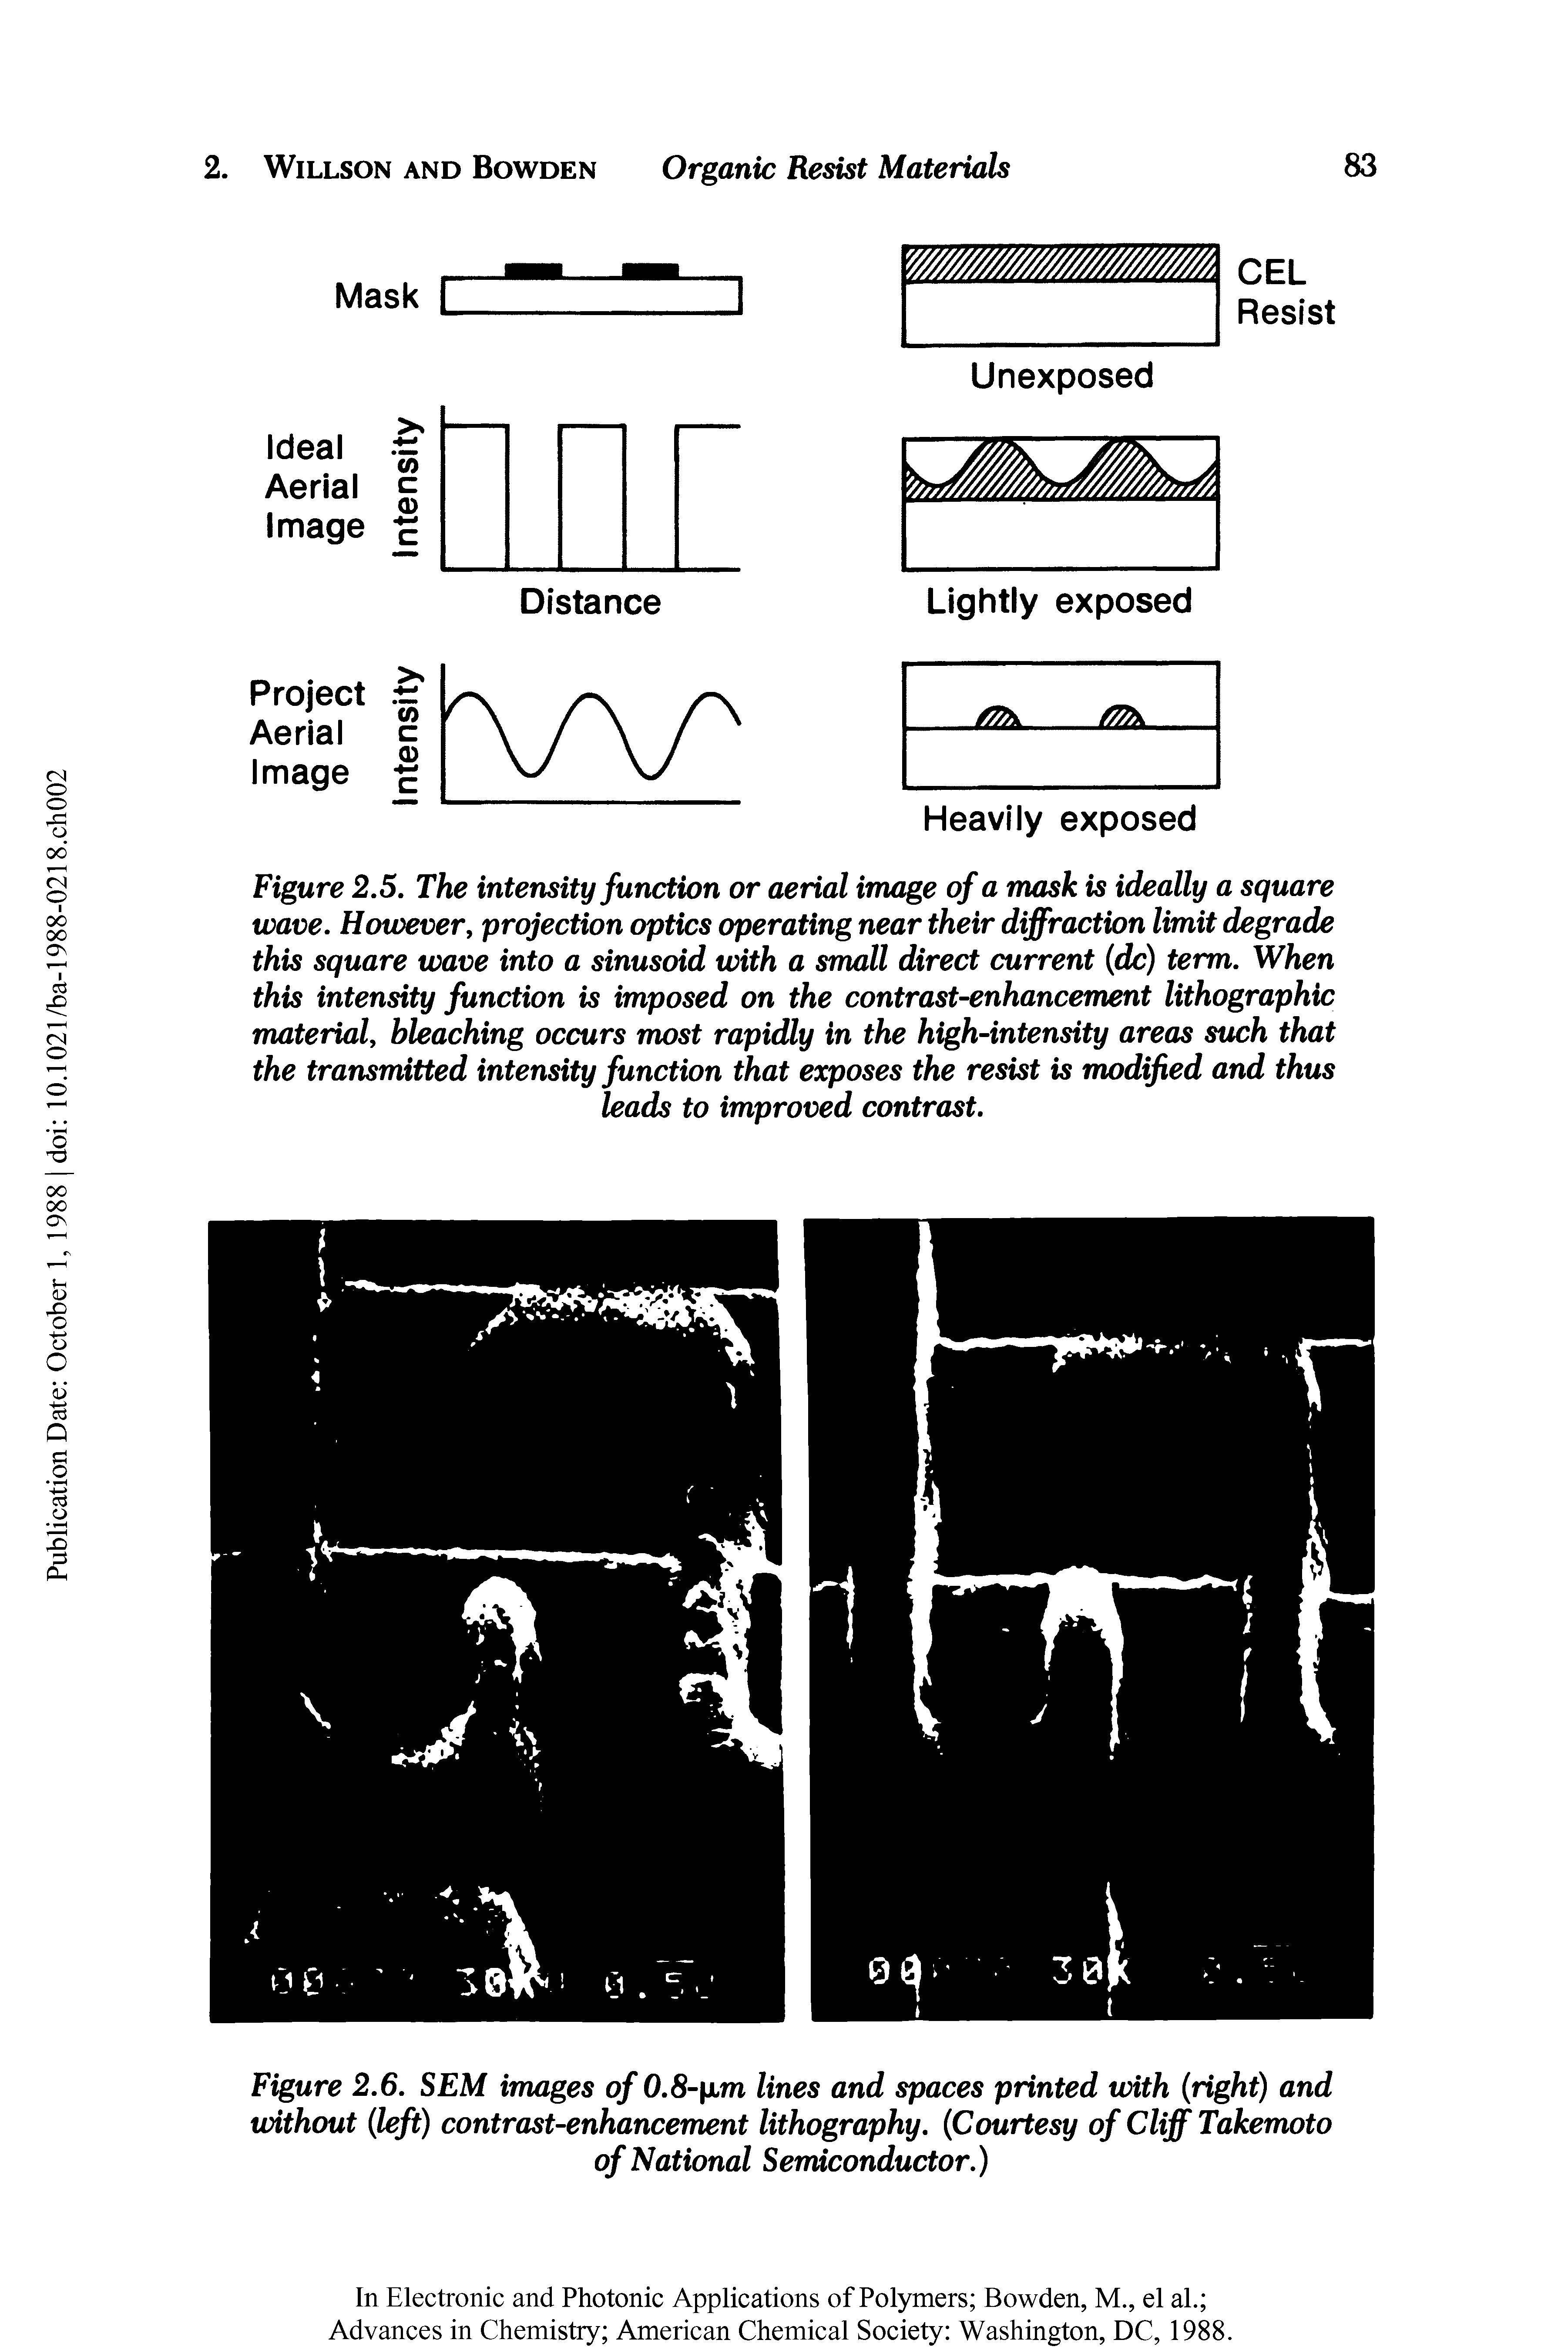 Figure 2.6. SEM images of 0.8-p.m lines and spaces printed with (right) and without (left) contrast-enhancement lithography. (Courtesy of Cliff Takemoto of National Semiconductor.)...